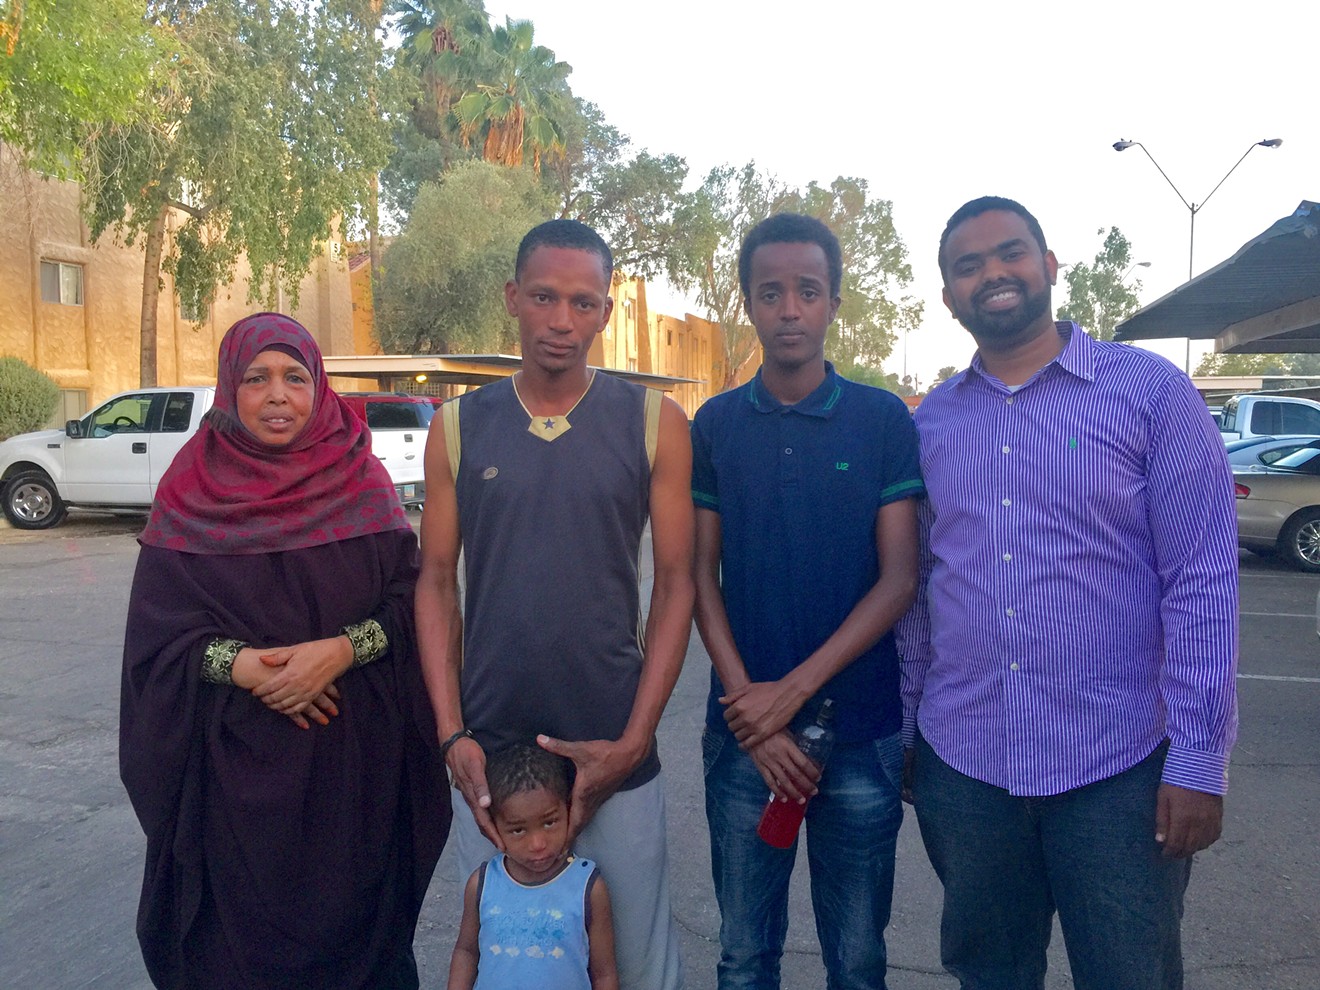 Mukhtar Sheik (right) with Bilad Yusuf (left) and family members.